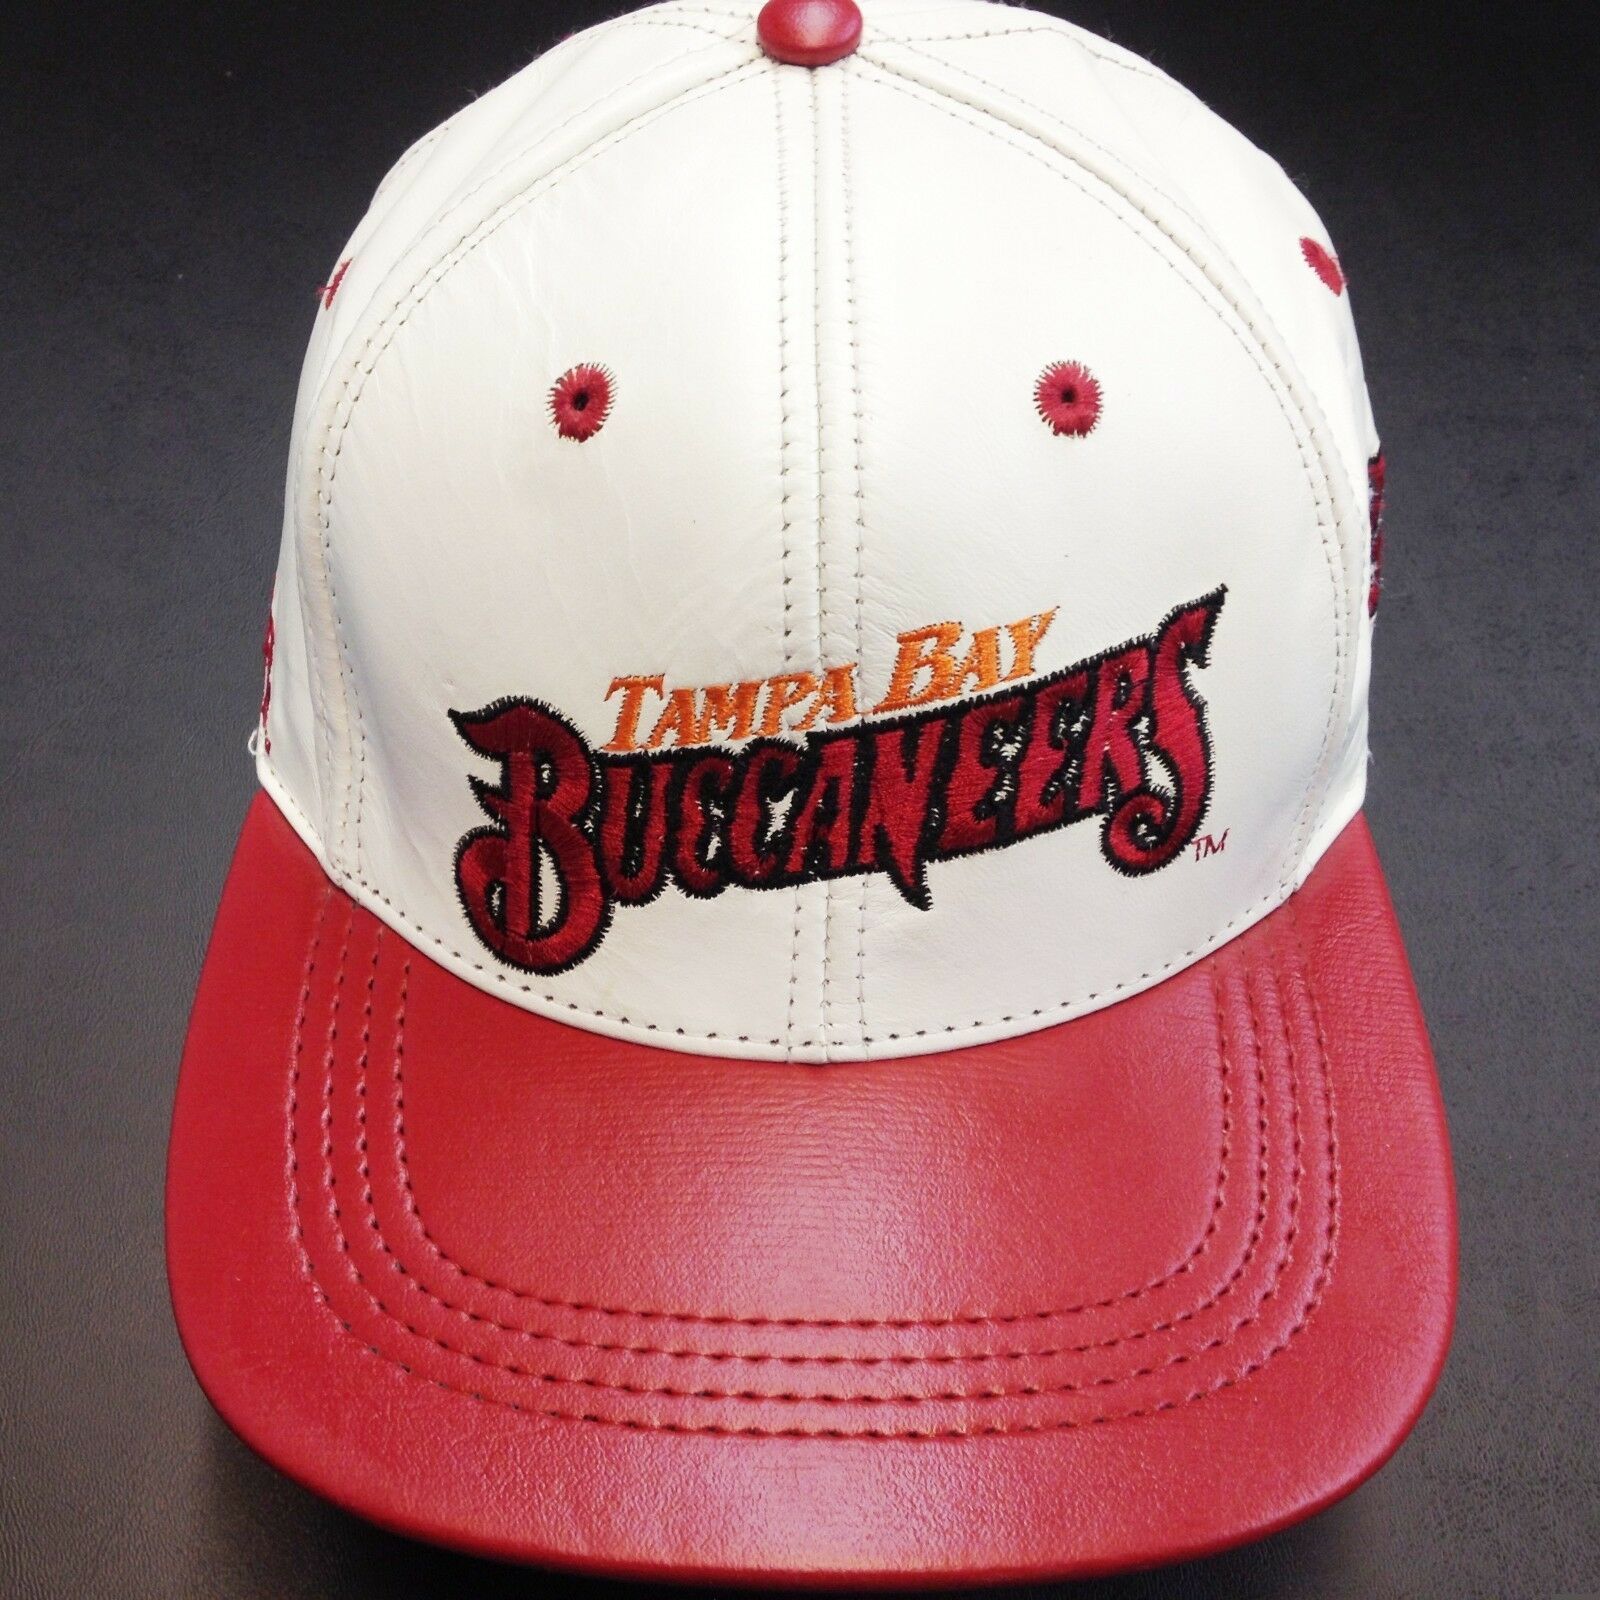 Primary image for Tampa Pay  Buccaneers, LOGO TEAM NFL BASEBALL LEATHER CAP